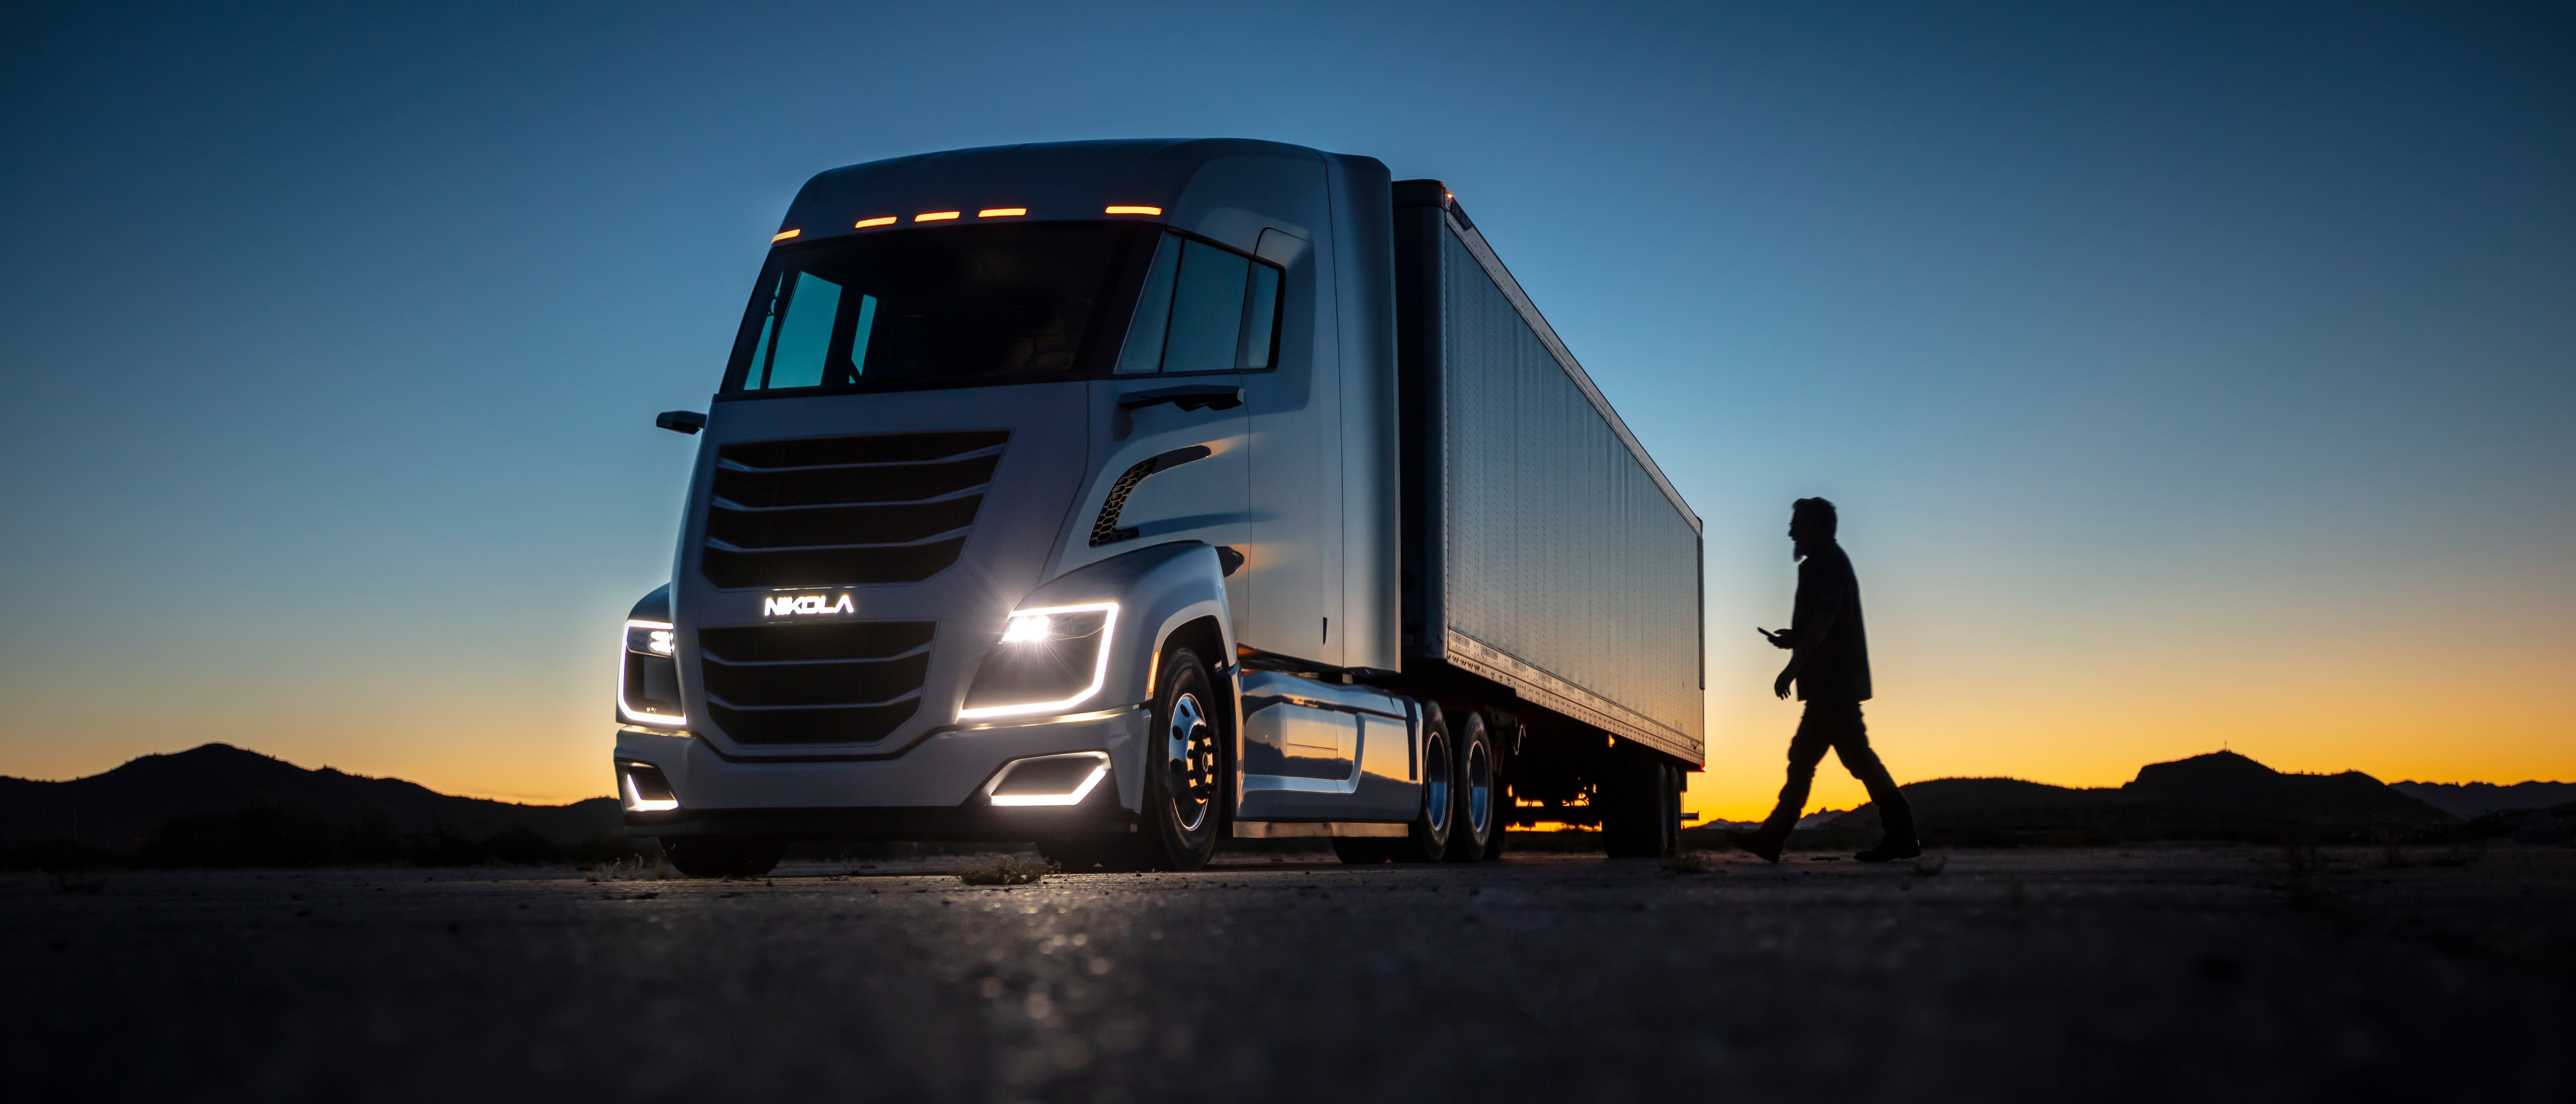 Nikola CEO Mark Russell On Hydrogen Truck Vision: 'This Is About Saving The Planet'